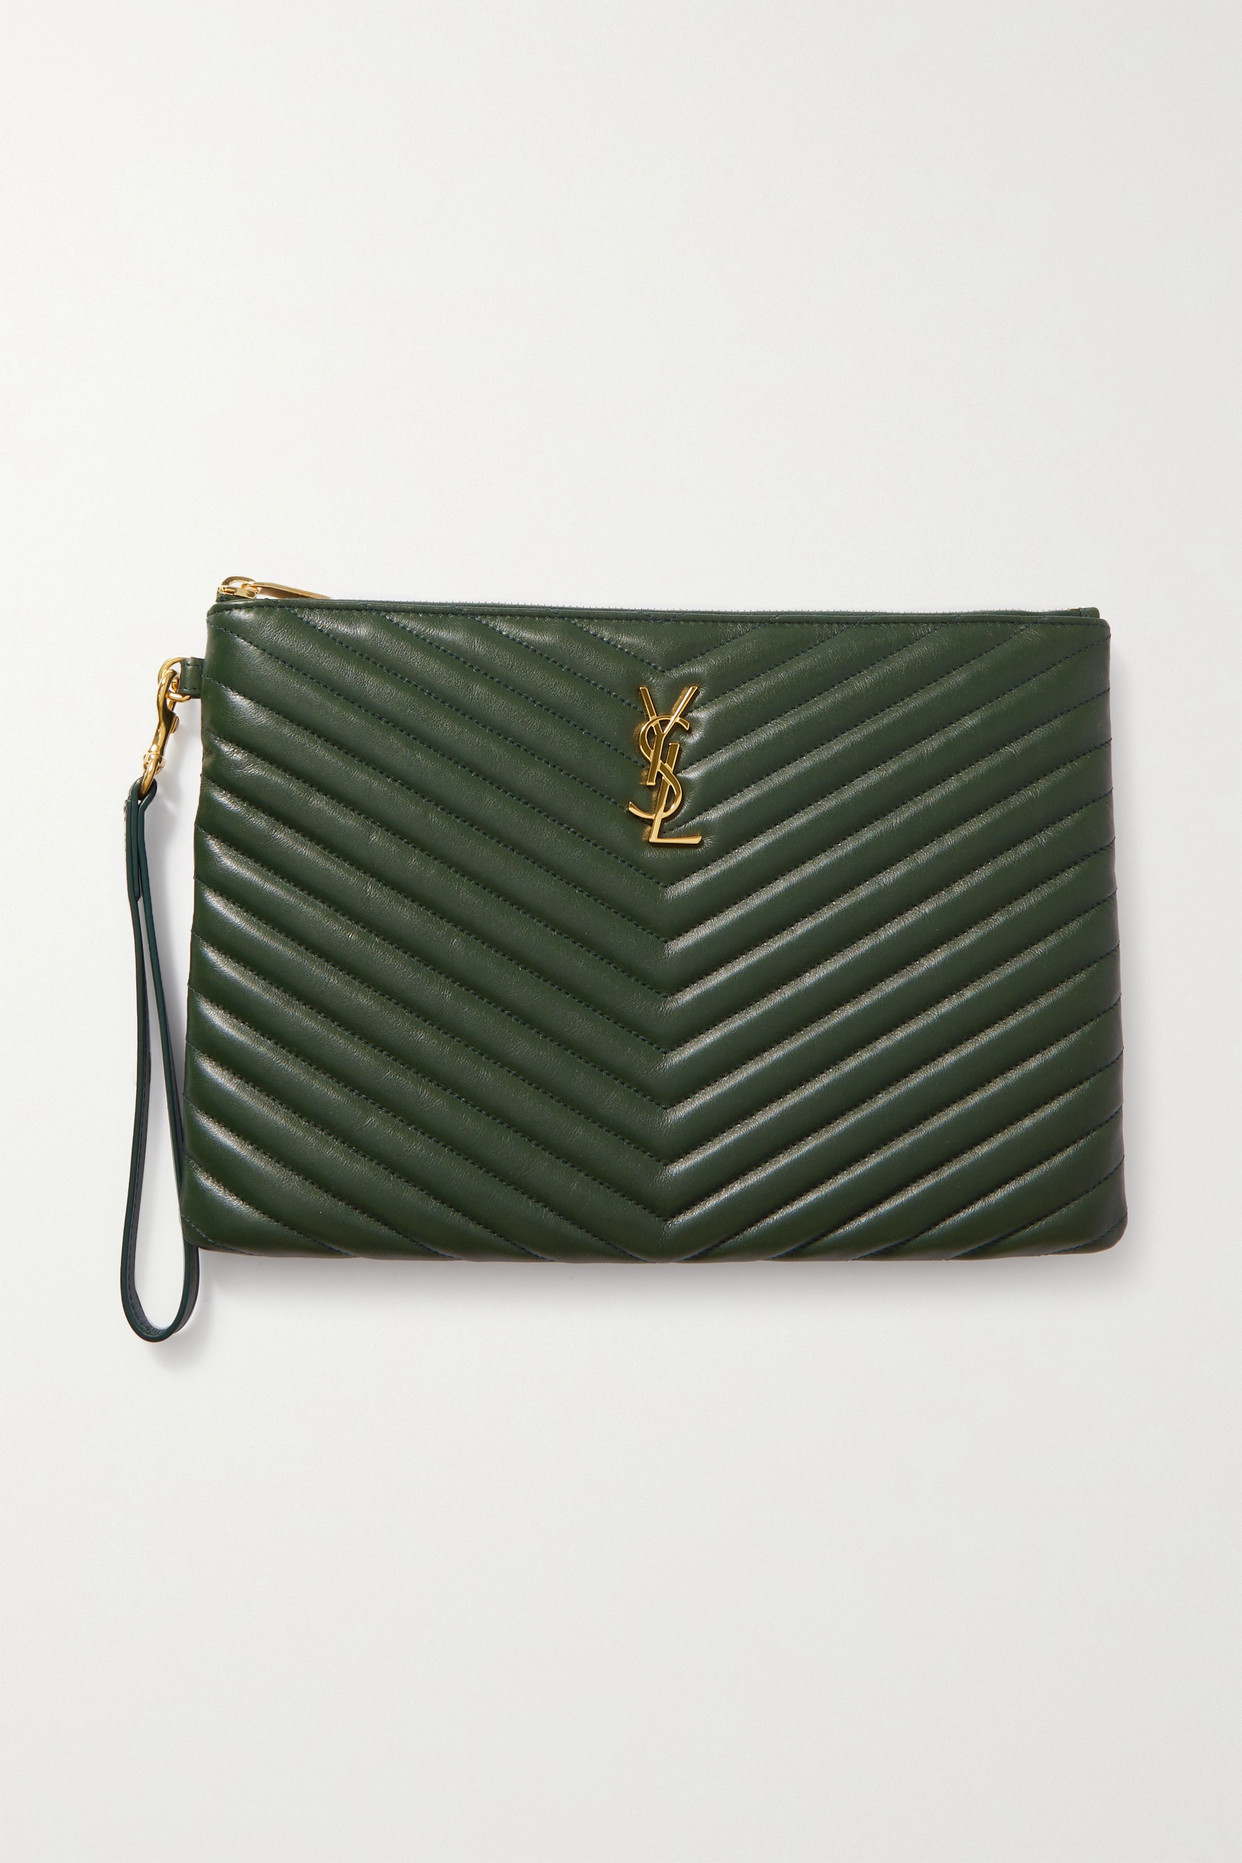 Saint Laurent Monogramme Quilted Leather Pouch - Green - One size